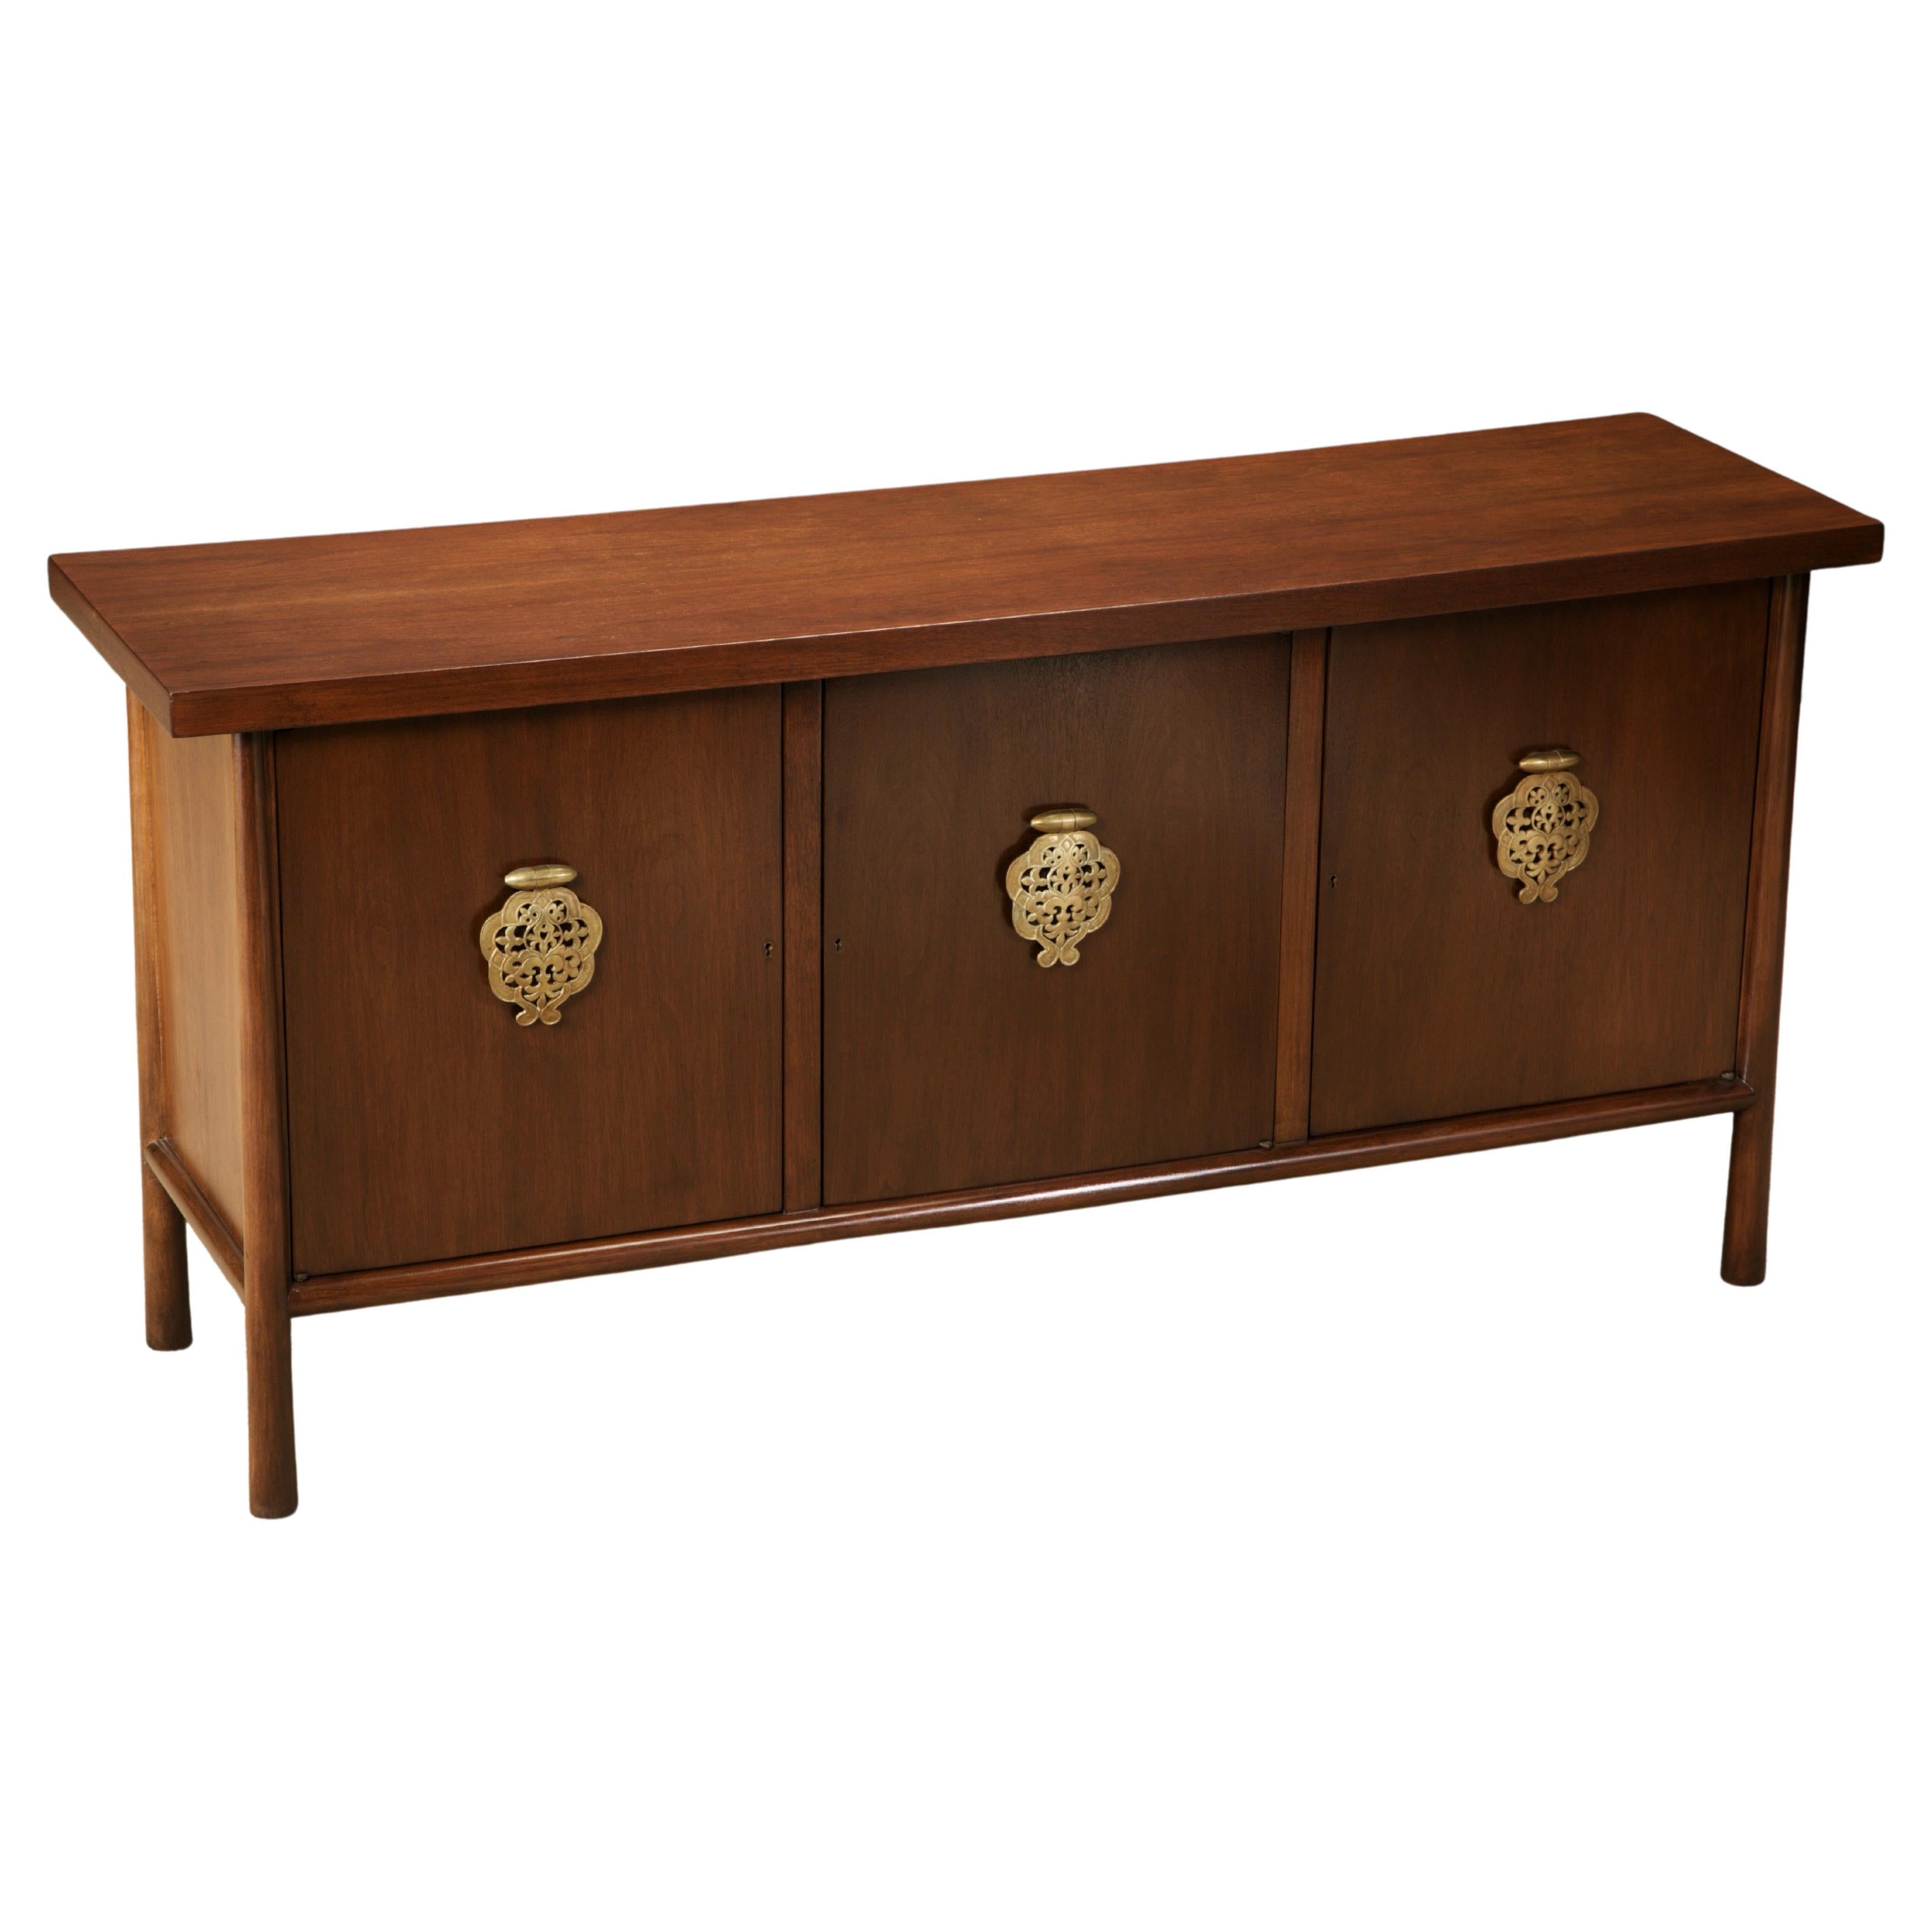 'Ming' Sideboard / Credenza by T.H. Robsjohn-Gibbings for Widdicomb, 1950s For Sale